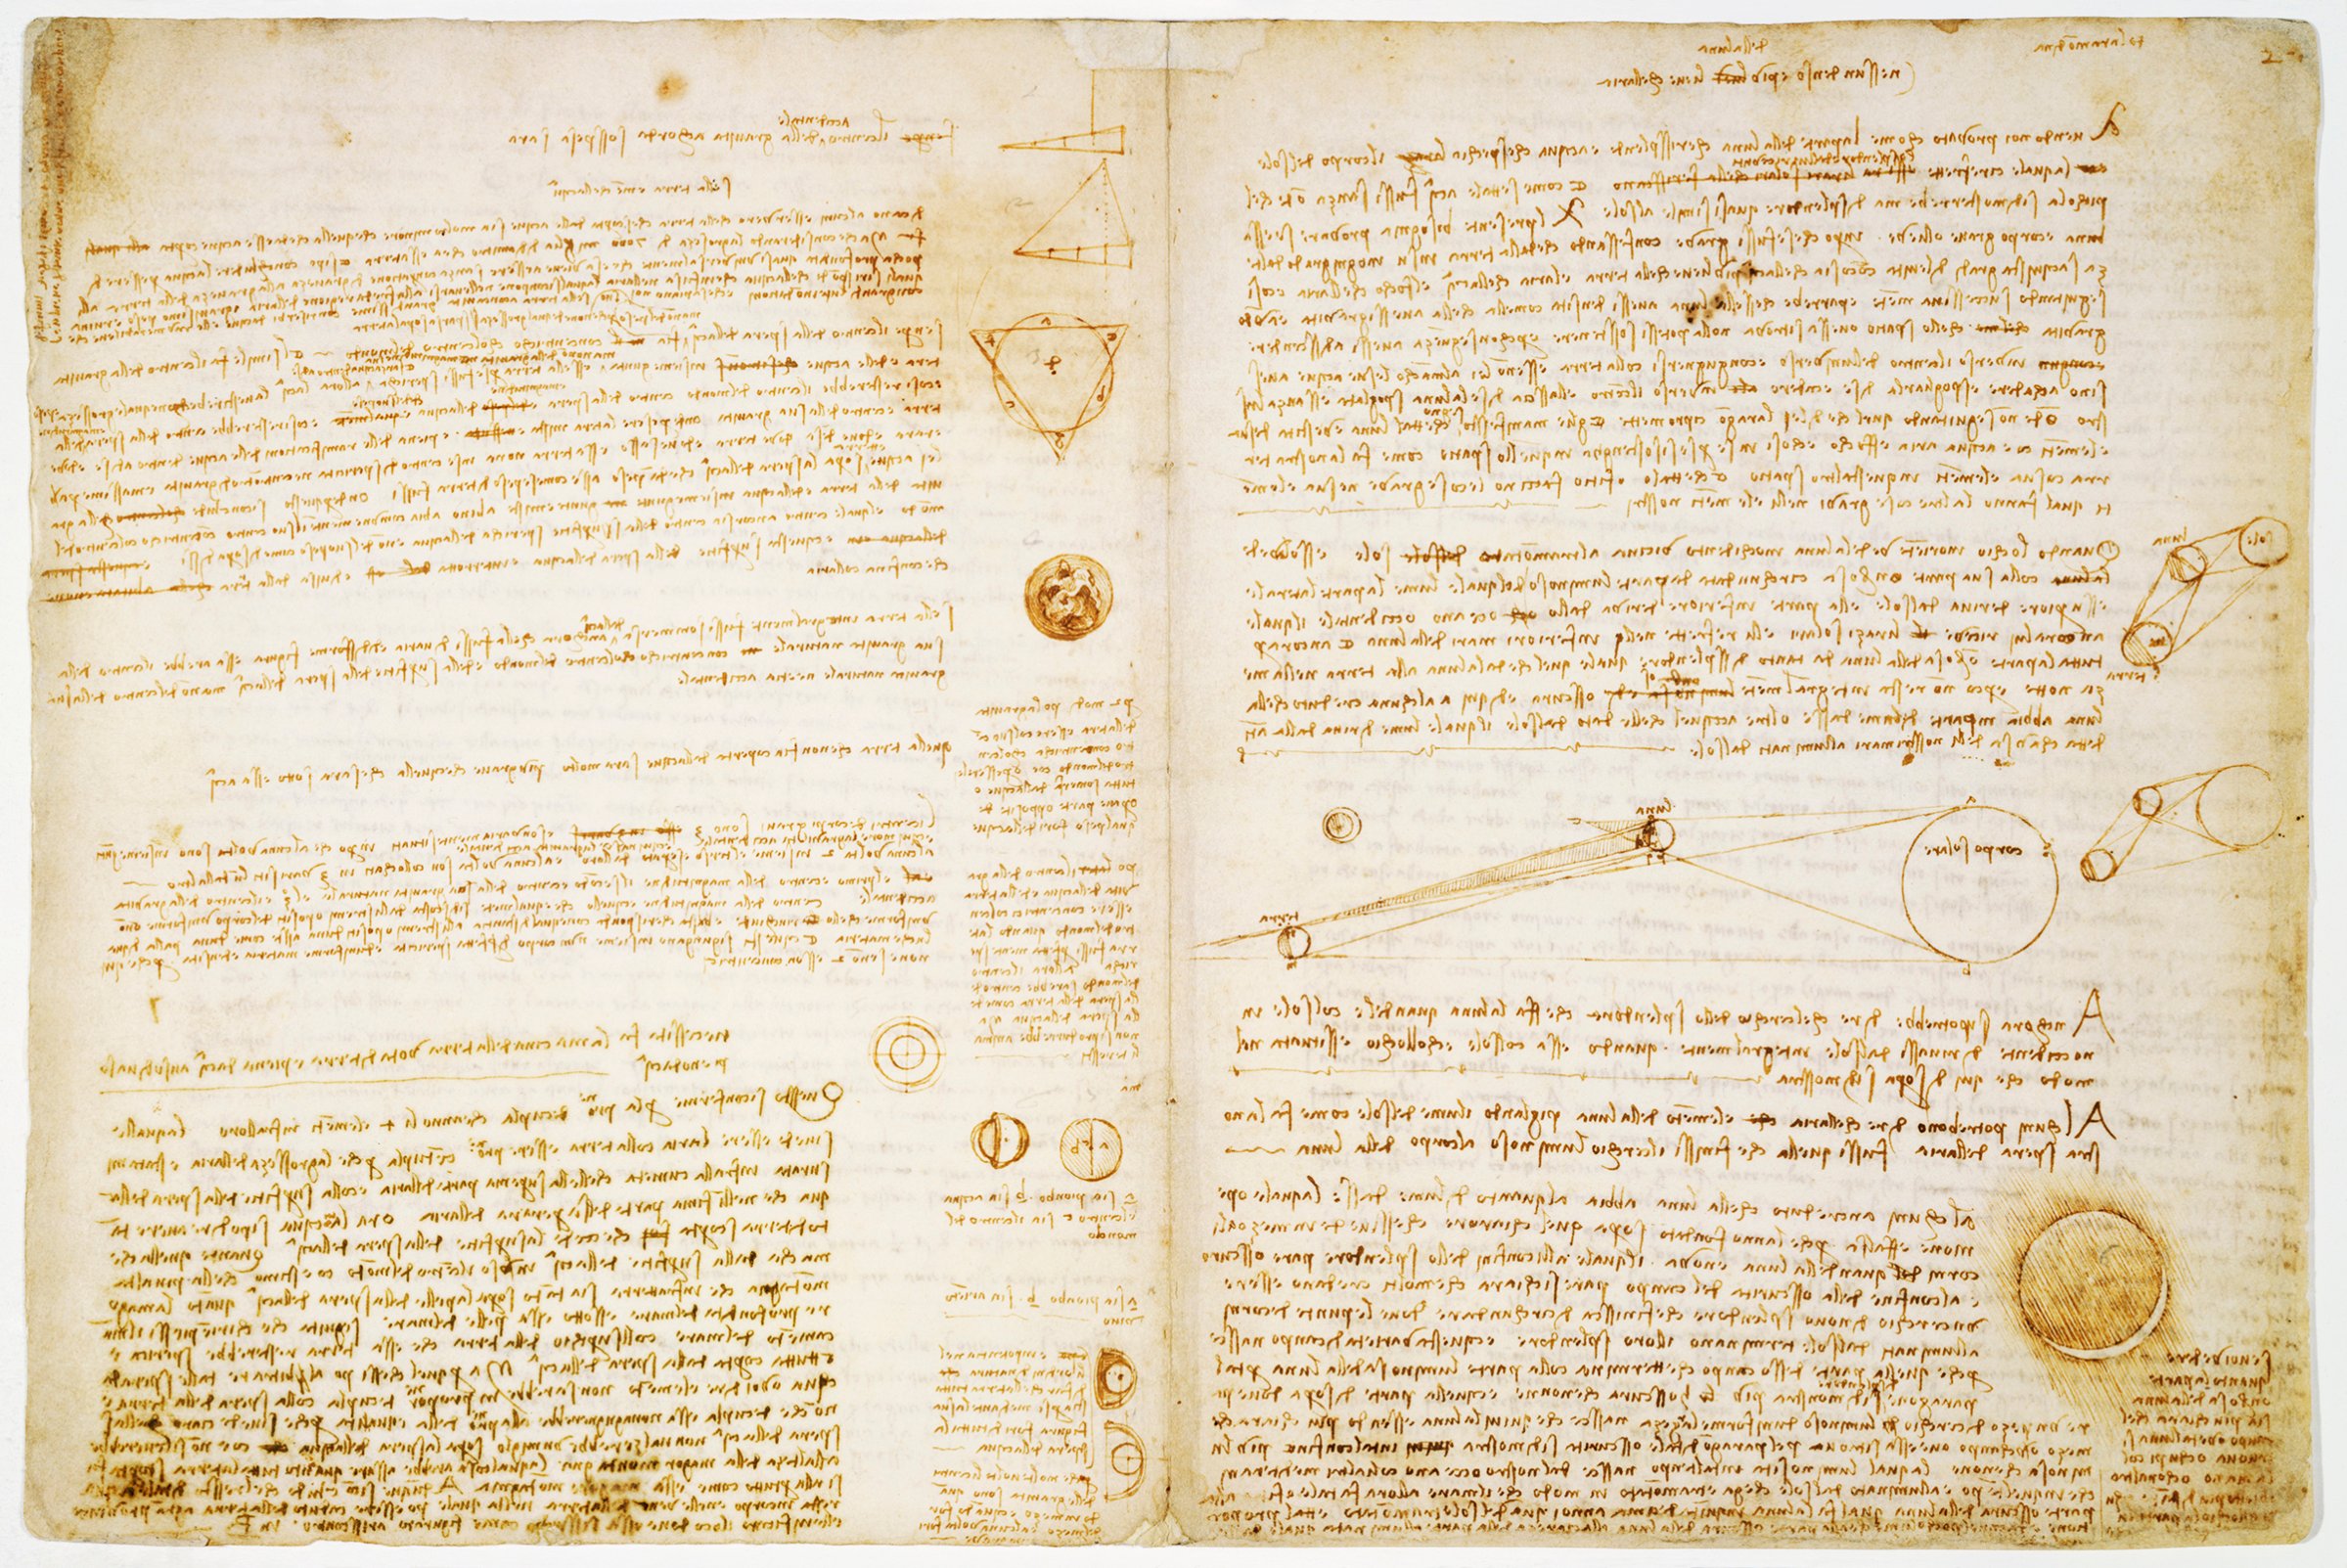 2019 marks the 500th anniversary of Leonardo’s death. To help celebrate the occasion, the Codex Leicester will be on display in several European museums